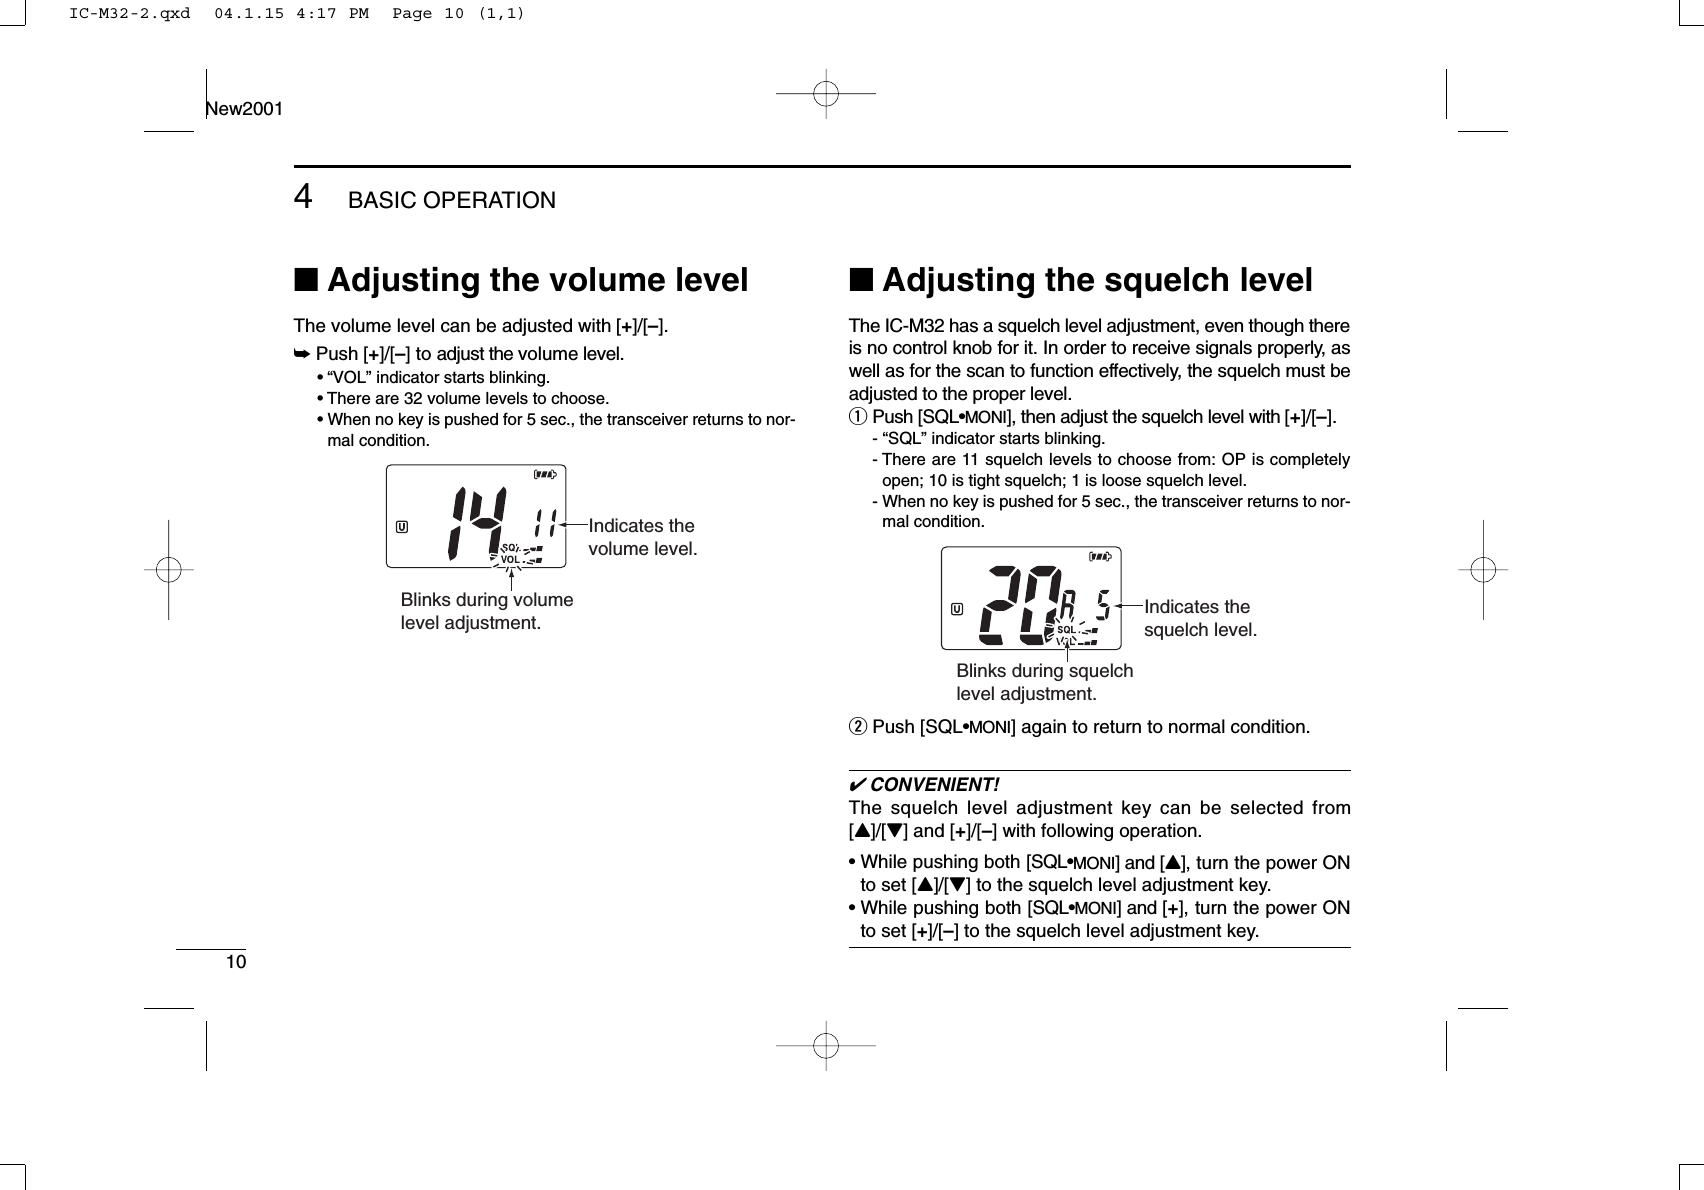 104BASIC OPERATIONNew2001■Adjusting the volume levelThe volume level can be adjusted with [+]/[–].➥Push [+]/[–] to adjust the volume level.•“VOL” indicator starts blinking.• There are 32 volume levels to choose.• When no key is pushed for 5 sec., the transceiver returns to nor-mal condition.■Adjusting the squelch levelThe IC-M32 has a squelch level adjustment, even though thereis no control knob for it. In order to receive signals properly, aswell as for the scan to function effectively, the squelch must beadjusted to the proper level.qPush [SQL•MONI], then adjust the squelch level with [+]/[–].- “SQL” indicator starts blinking.- There are 11 squelch levels to choose from: OP is completelyopen; 10 is tight squelch; 1 is loose squelch level.- When no key is pushed for 5 sec., the transceiver returns to nor-mal condition.wPush [SQL•MONI] again to return to normal condition.✔CONVENIENT!The squelch level adjustment key can be selected from[Y]/[Z] and [+]/[–] with following operation.• While pushing both [SQL•MONI] and [Y], turn the power ONto set [Y]/[Z] to the squelch level adjustment key.• While pushing both [SQL•MONI] and [+], turn the power ONto set [+]/[–] to the squelch level adjustment key.Blinks during squelch level adjustment.Indicates the squelch level.Blinks during volume level adjustment.Indicates the volume level.IC-M32-2.qxd  04.1.15 4:17 PM  Page 10 (1,1)